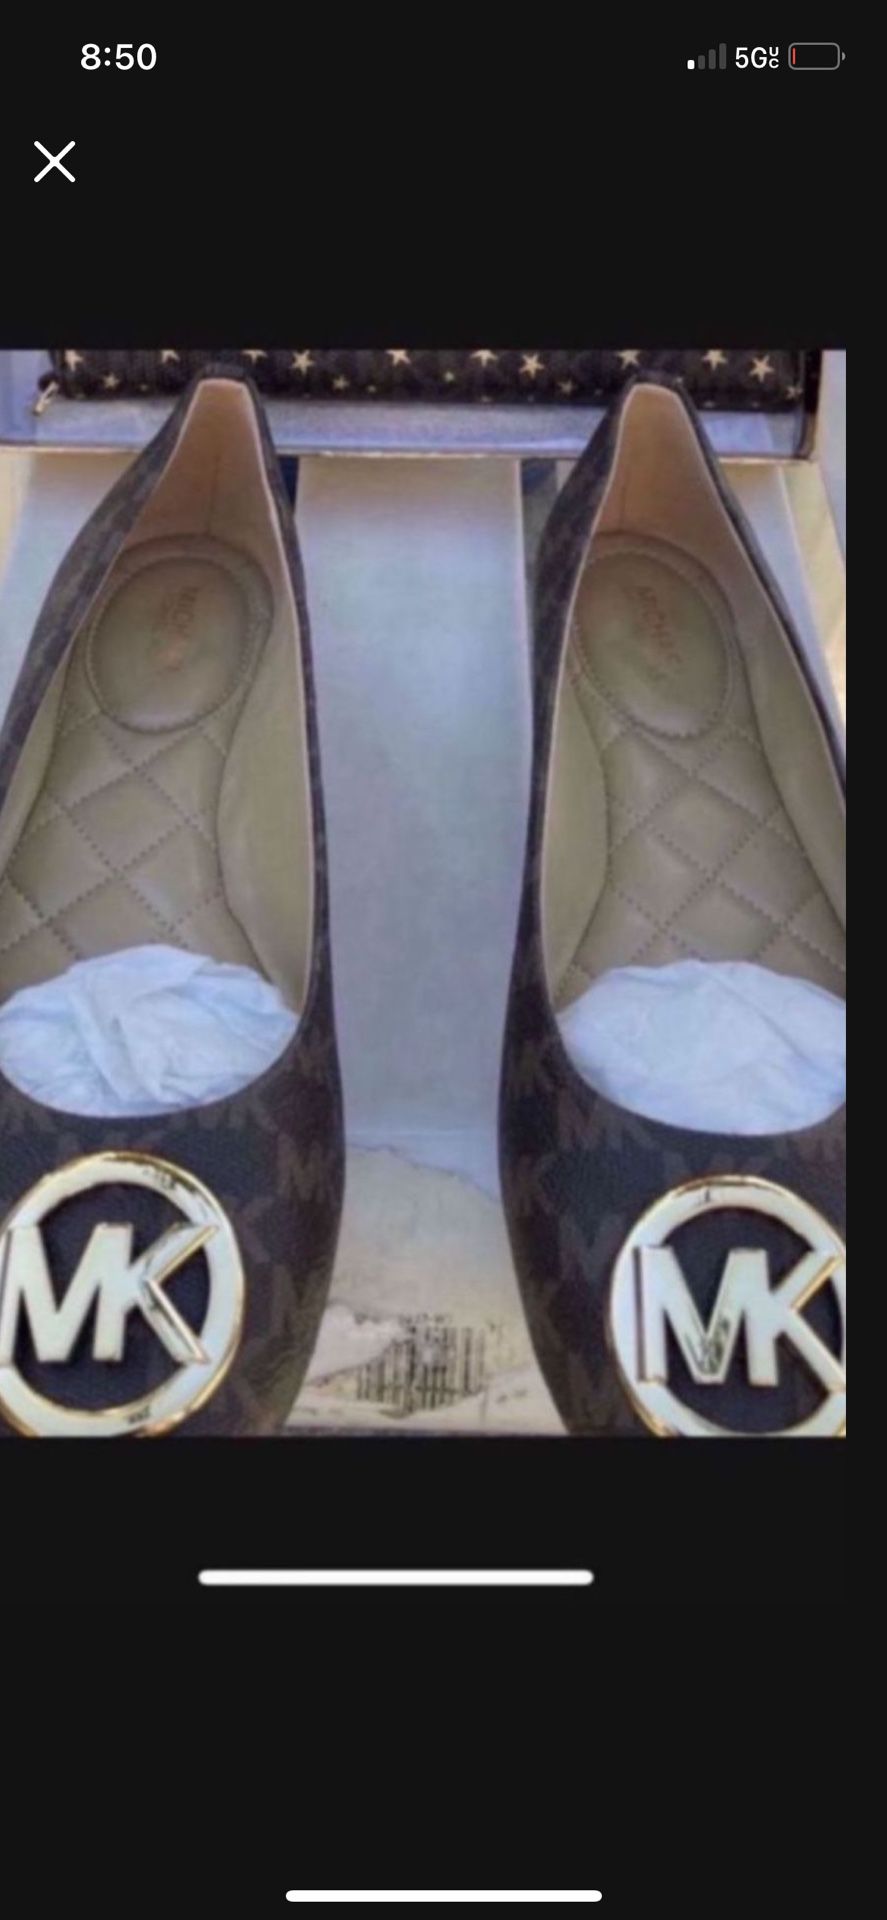 MICHAEL KORS Women's Moccasin Flats size 7.5 NEW  serious inquiries only please  Pick up location in the city of Pico Rivera 